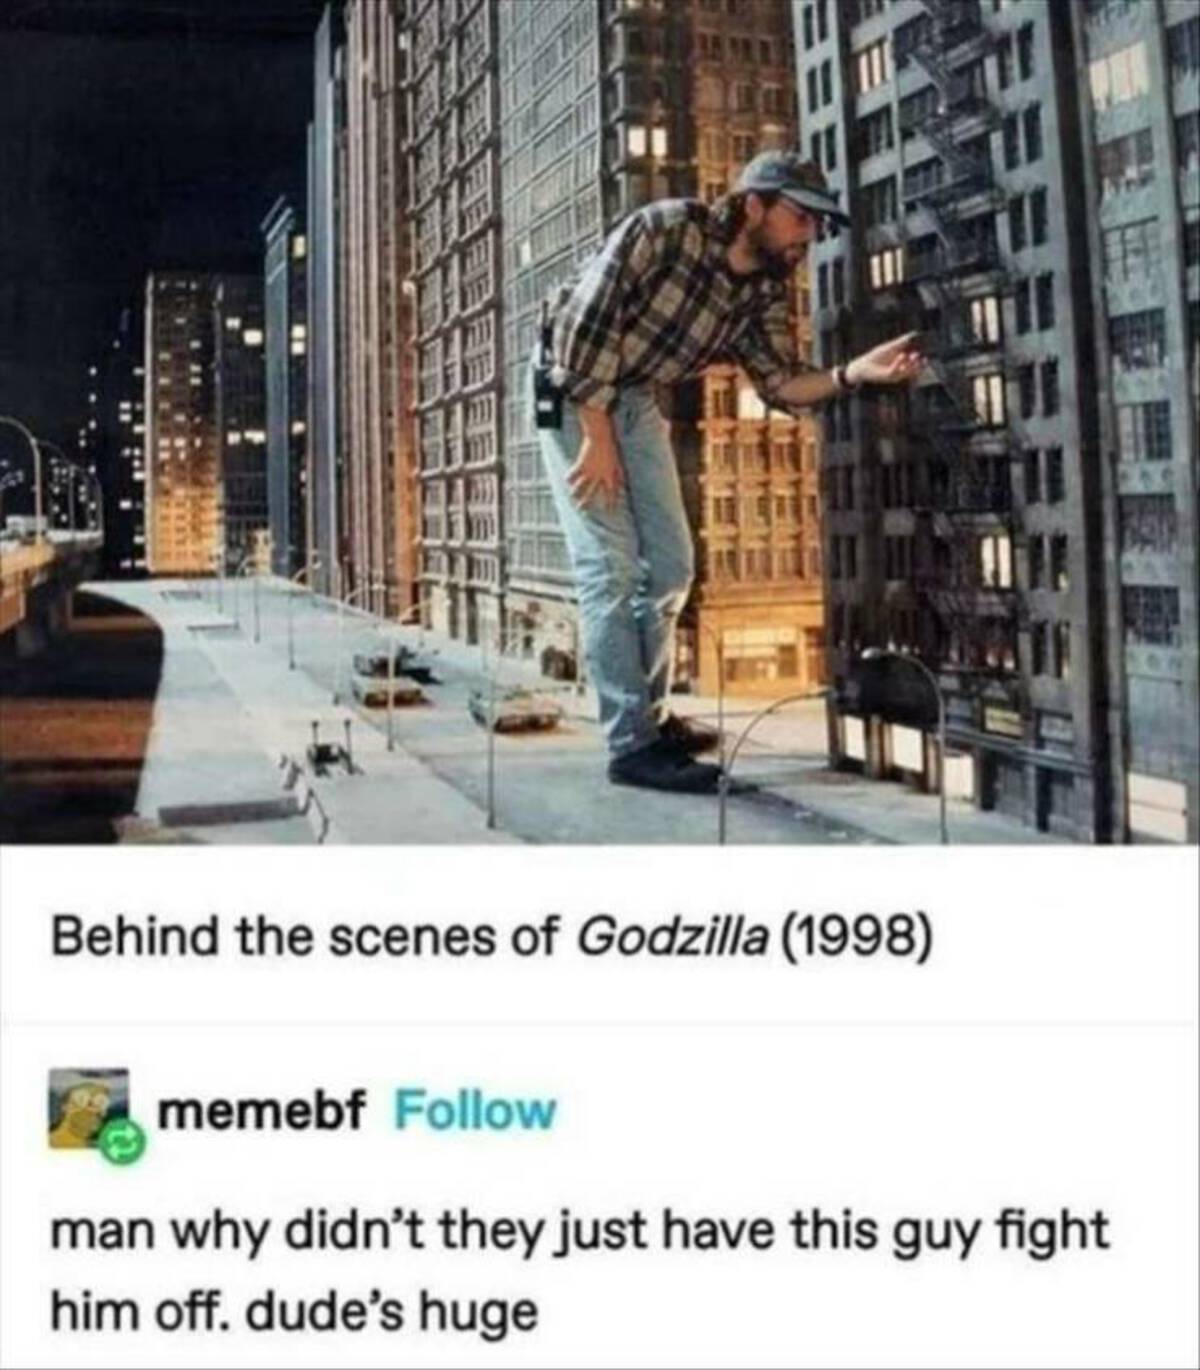 roland emmerich godzilla 1998 - Behind the scenes of Godzilla 1998 memebf man why didn't they just have this guy fight him off. dude's huge